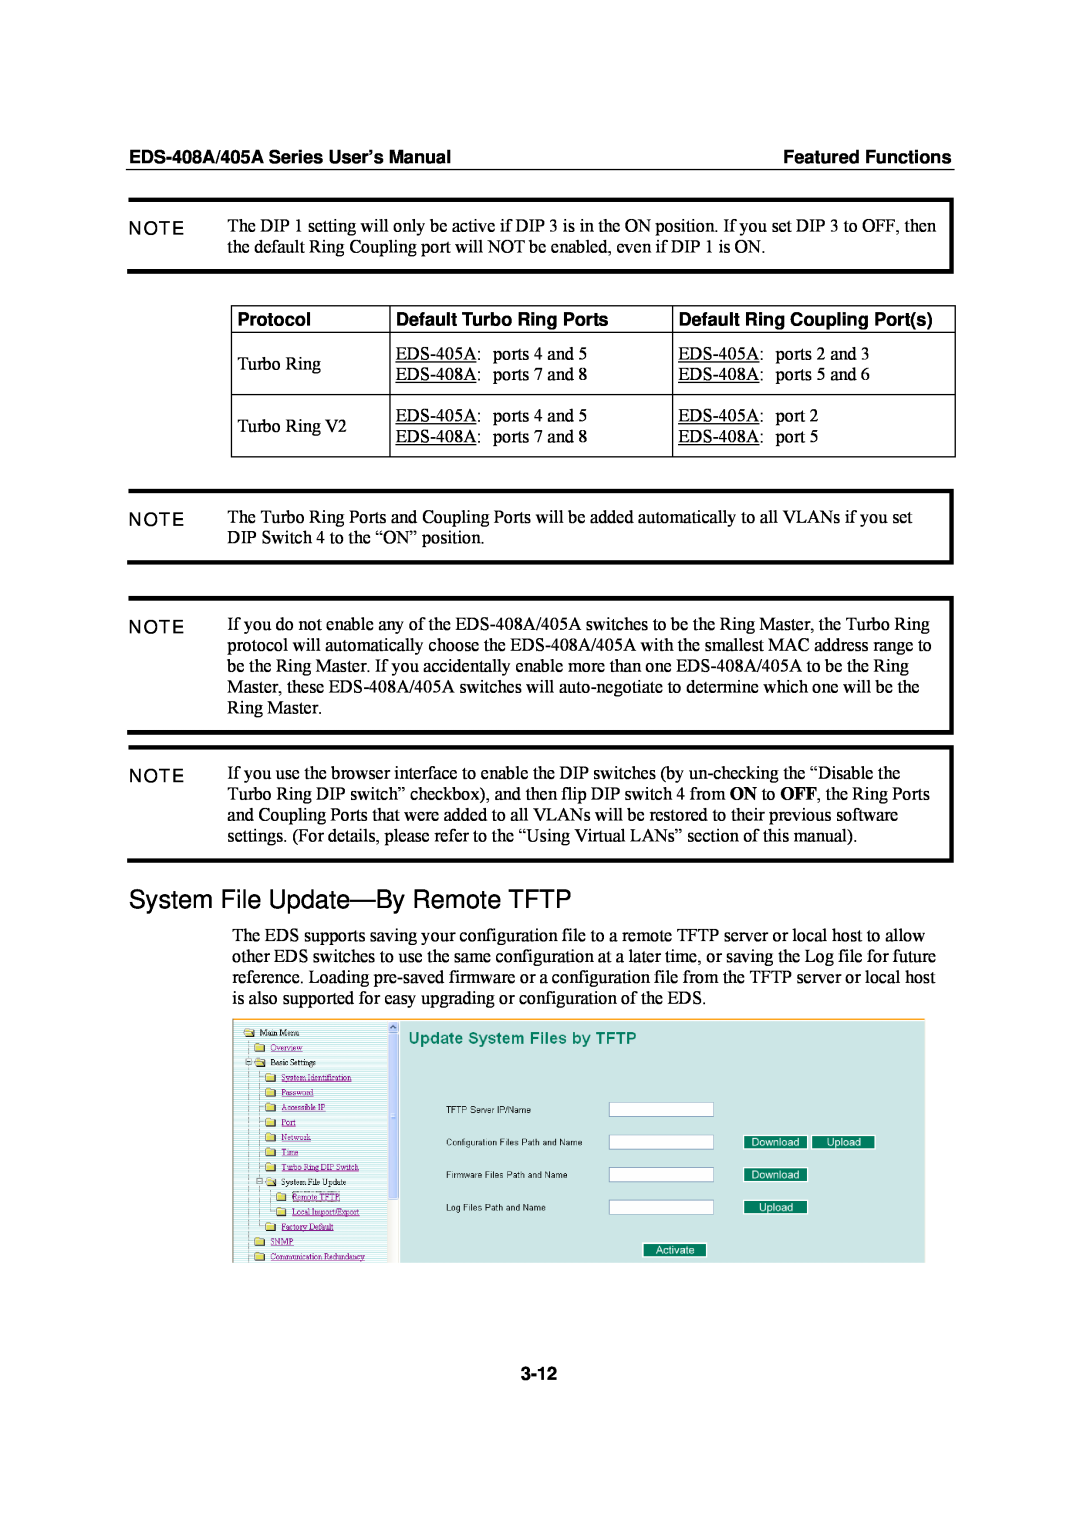 Moxa Technologies EDS-405A System File Update-By Remote TFTP, Protocol, Default Turbo Ring Ports, 3-12, Featured Functions 